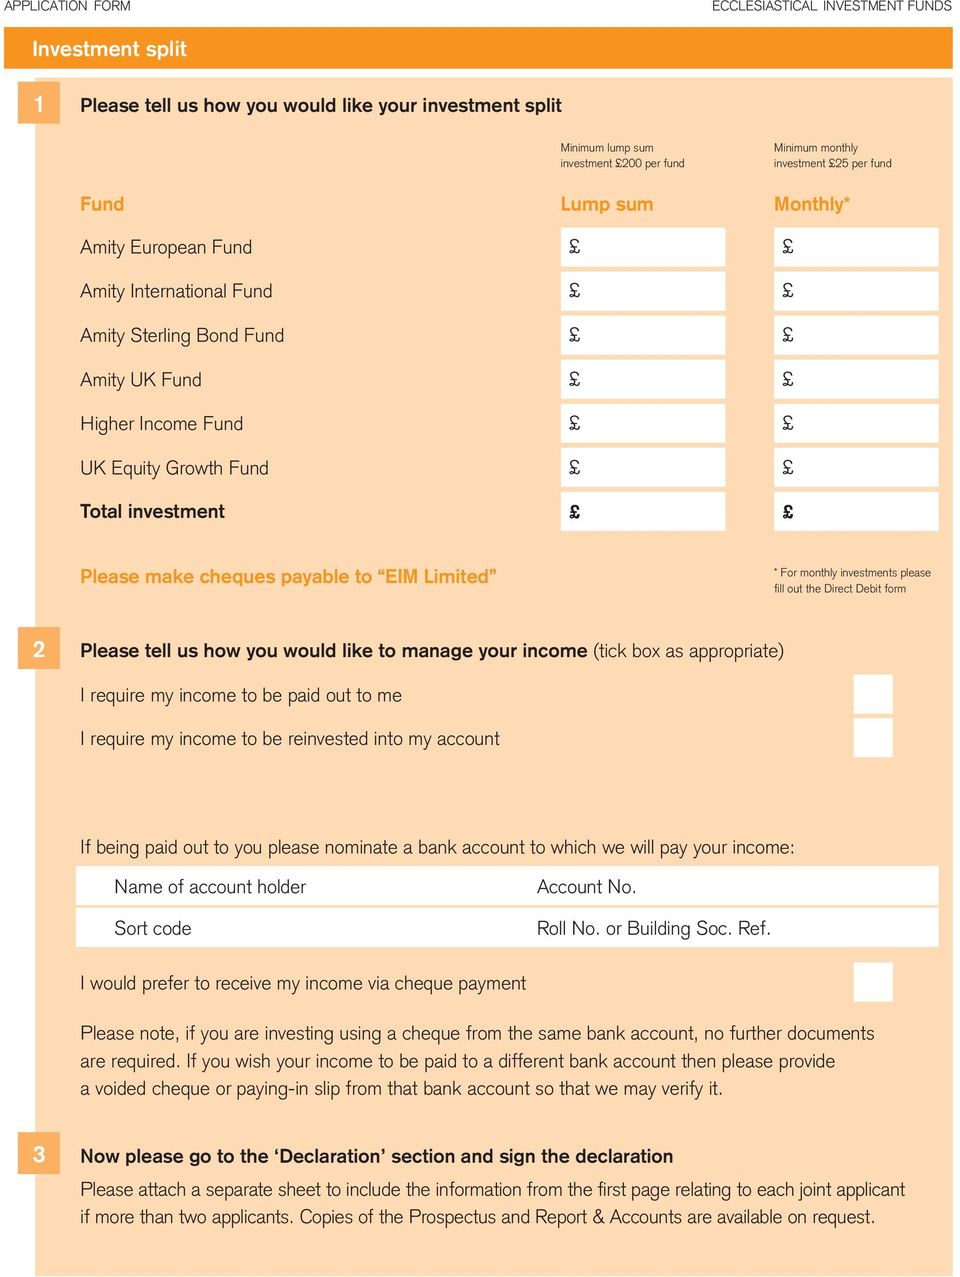 fill out the Direct Debit form 2 Please tell us how you would like to manage your income (tick box as appropriate) I require my income to be paid out to me I require my income to be reinvested into